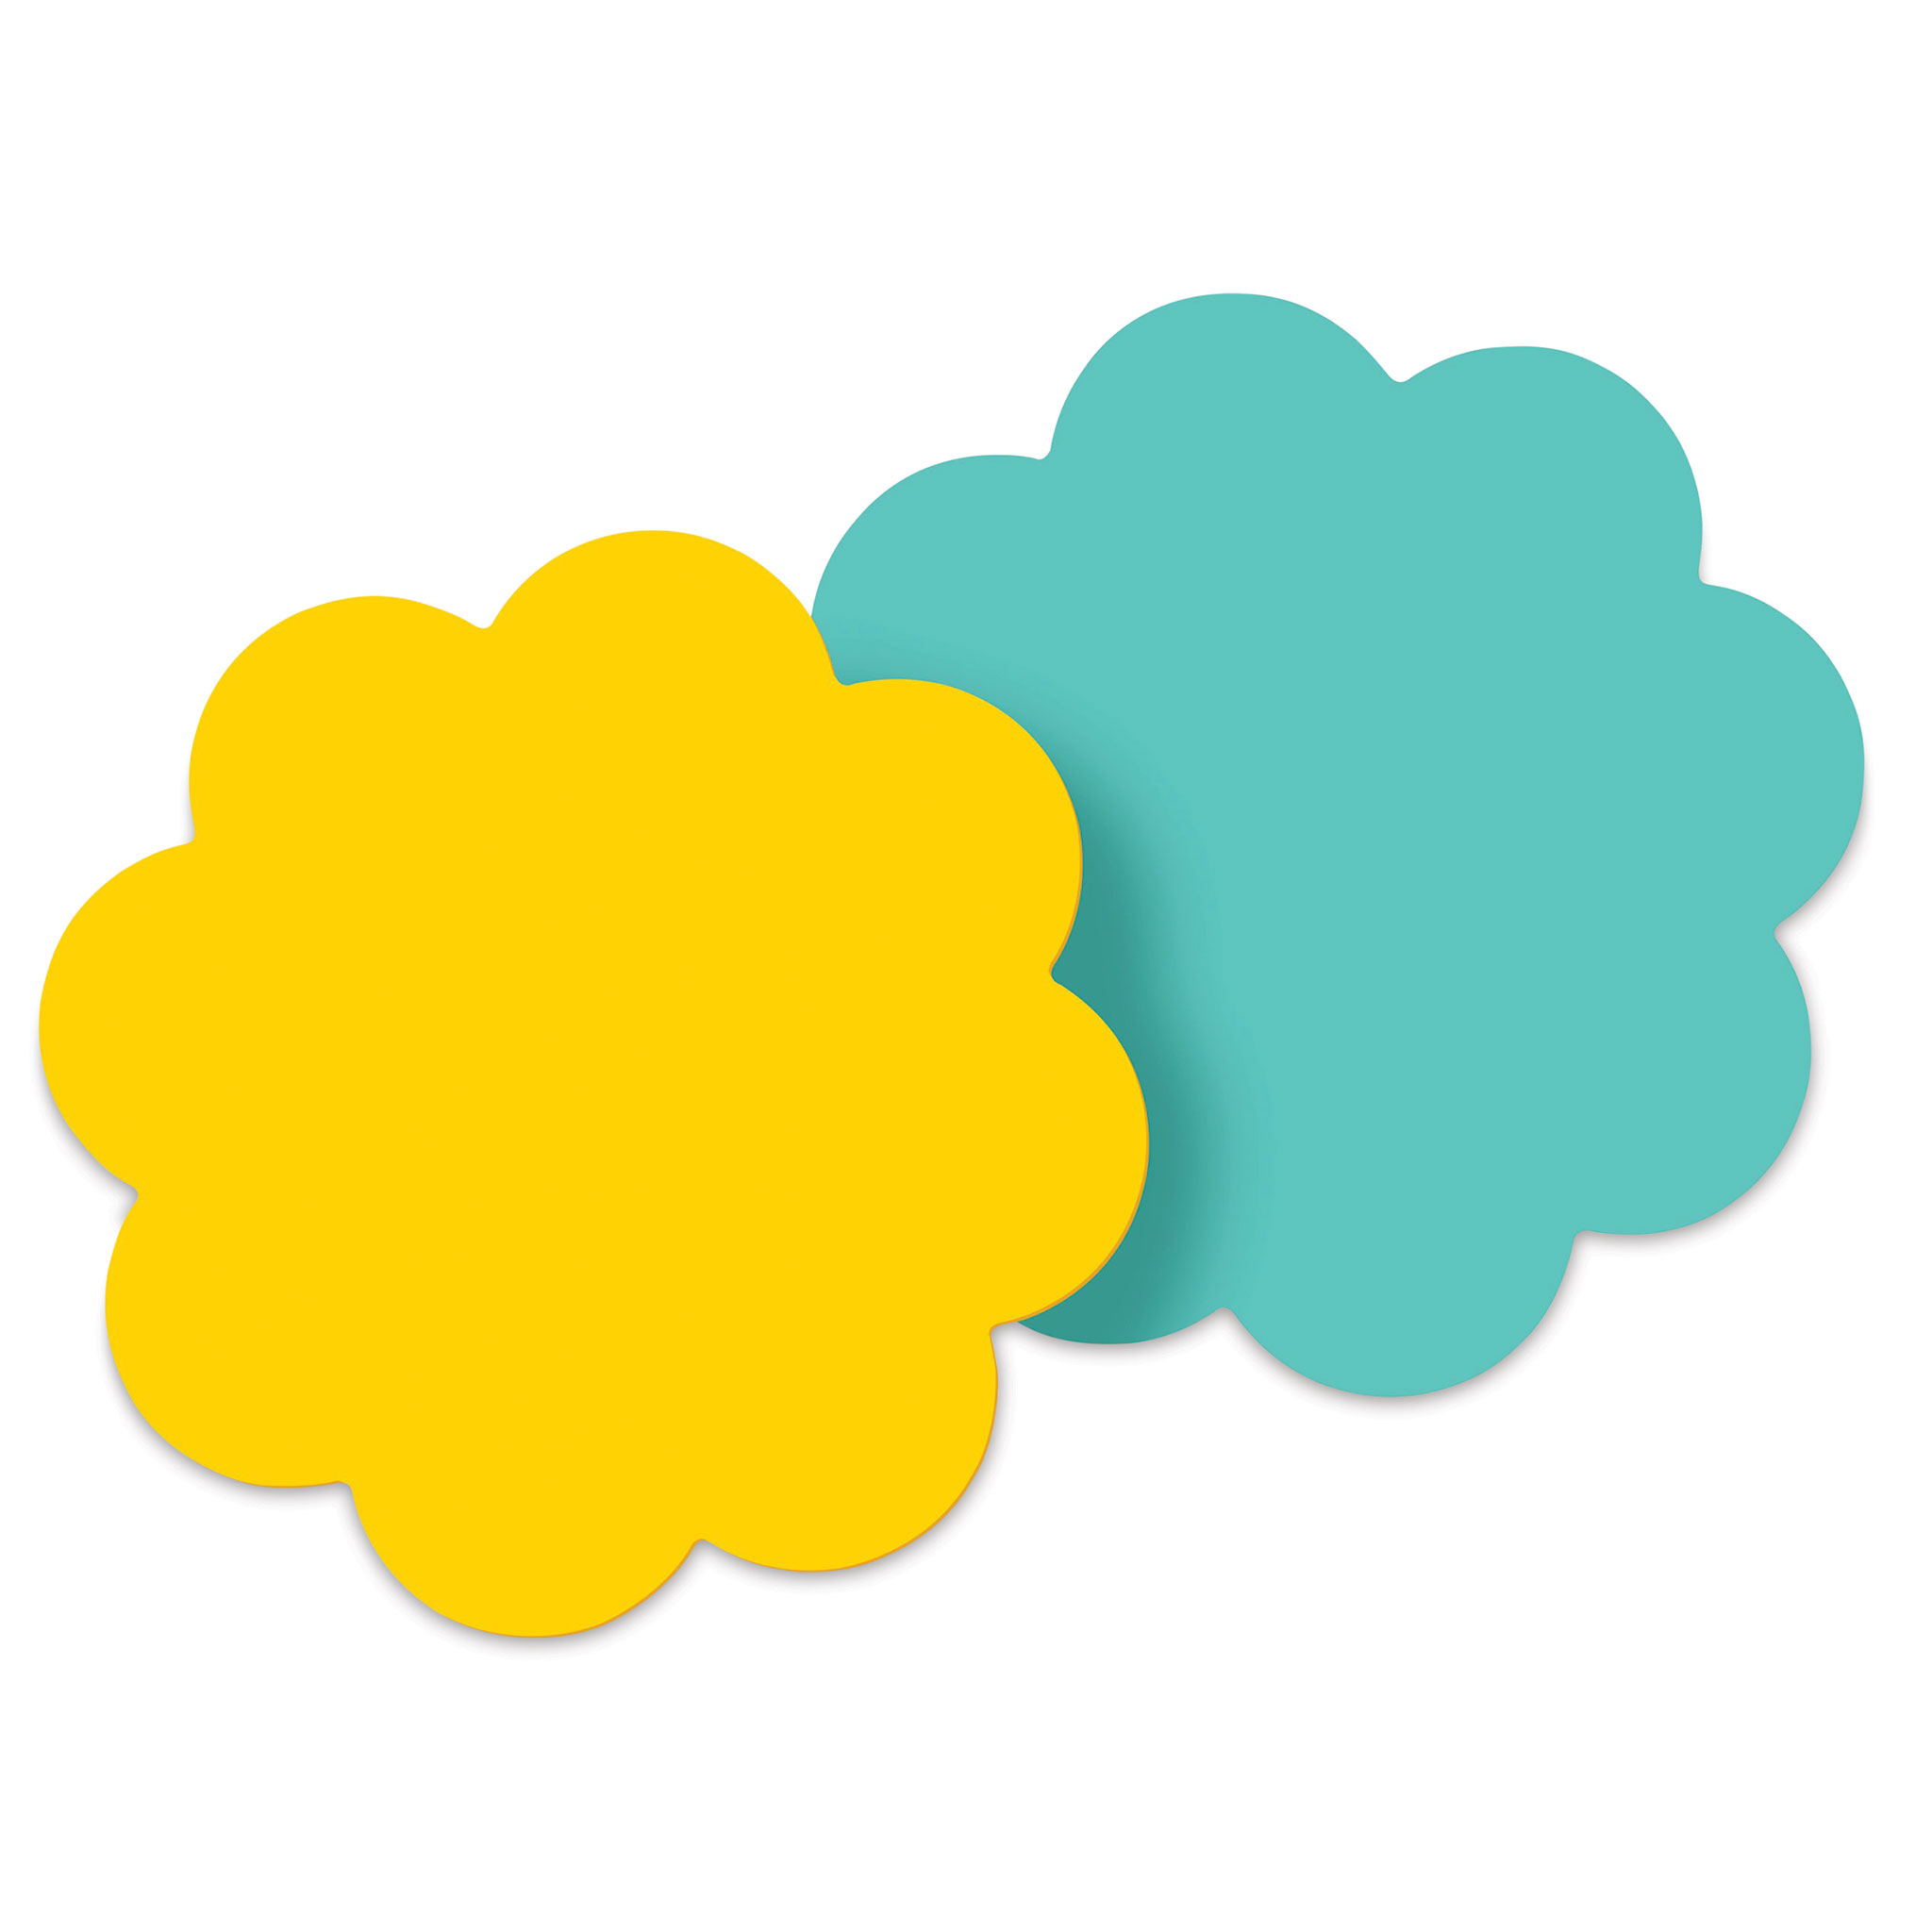 Post-it Note Shapes - Daisy, Pkg of 2, 3 x 3